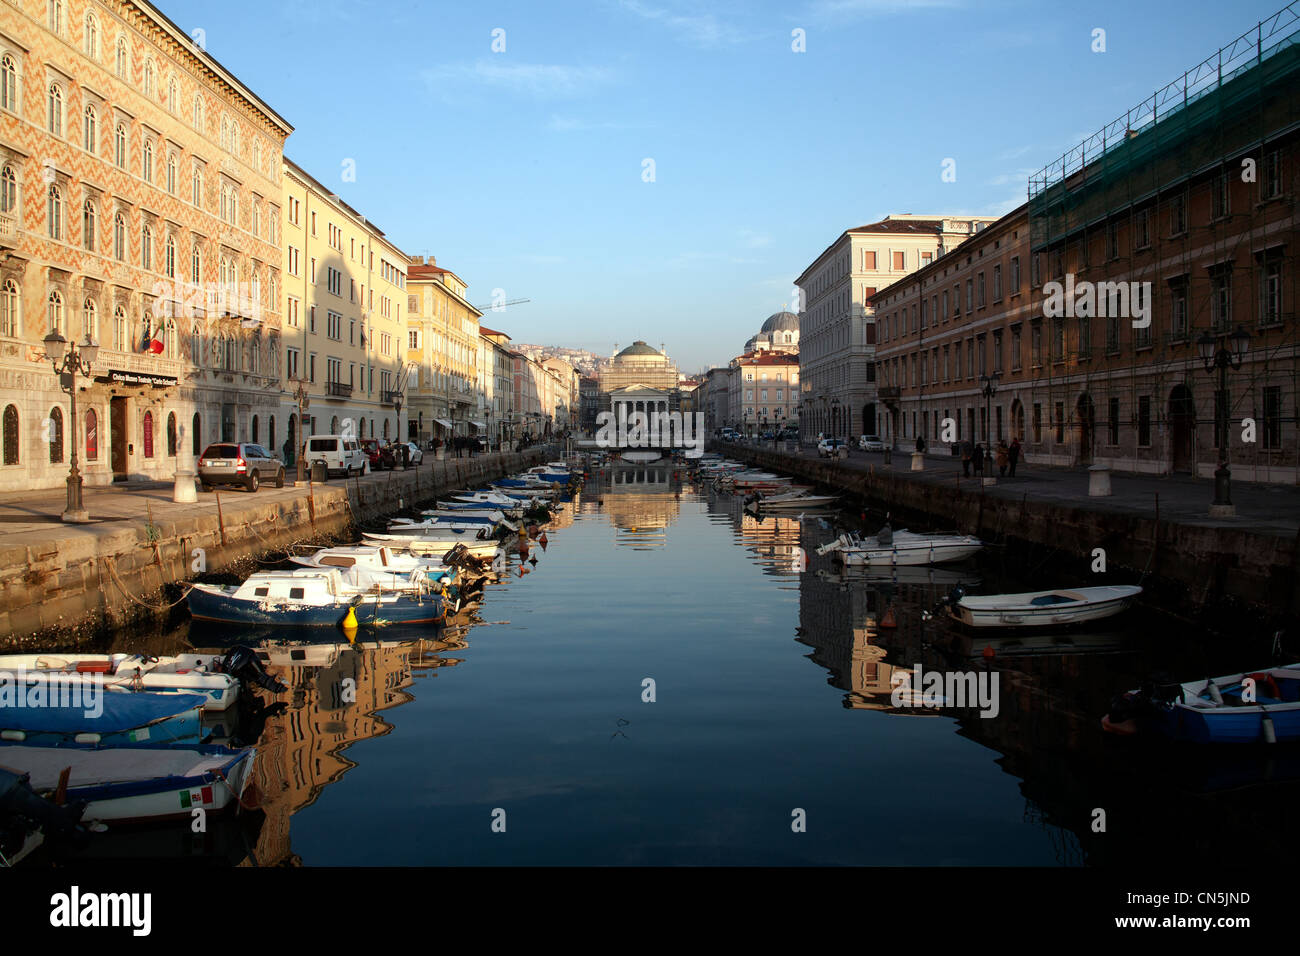 Buildings and boats reflected in the still water of the Grand Canal, Trieste, Italy Stock Photo